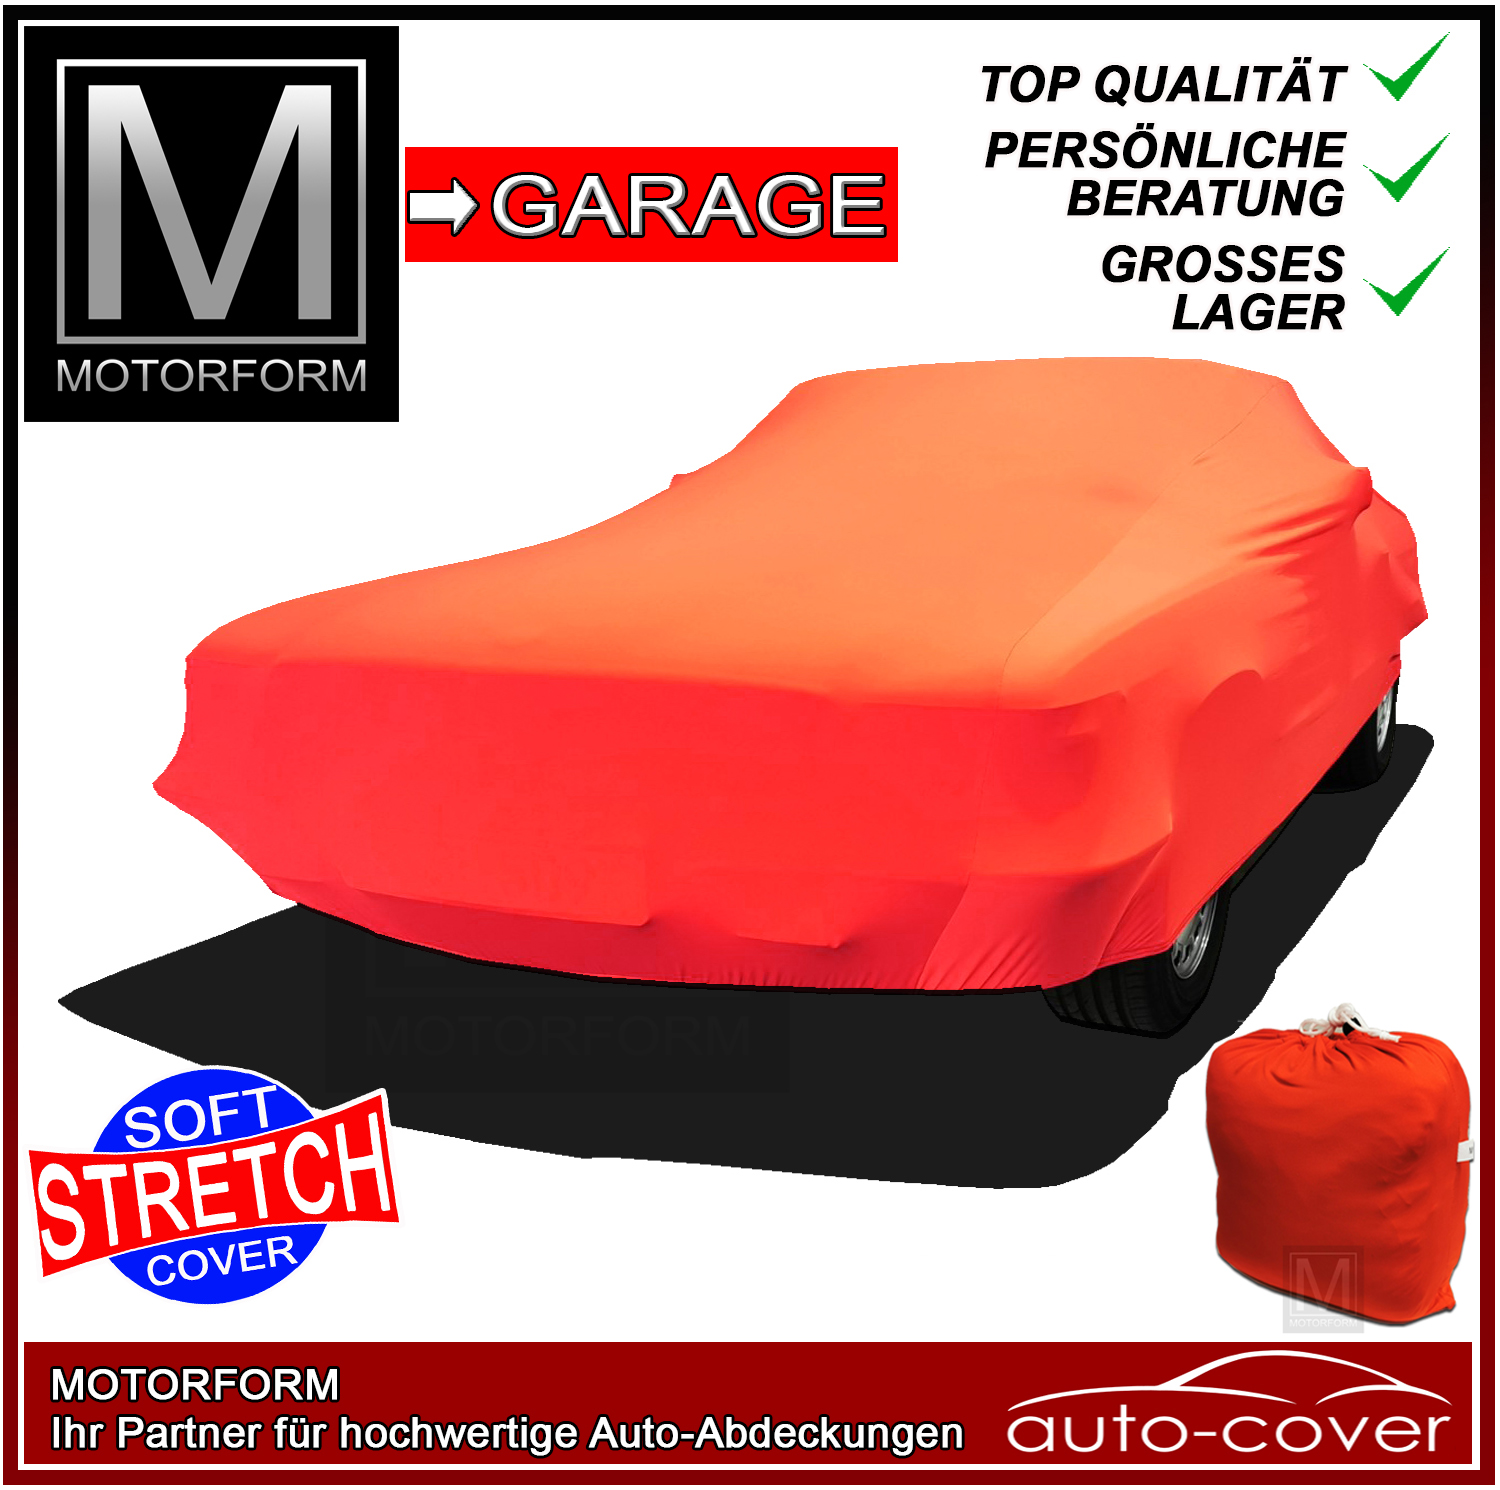 Super Stretchy Cover for Nissan Micra K10 (1982-92)